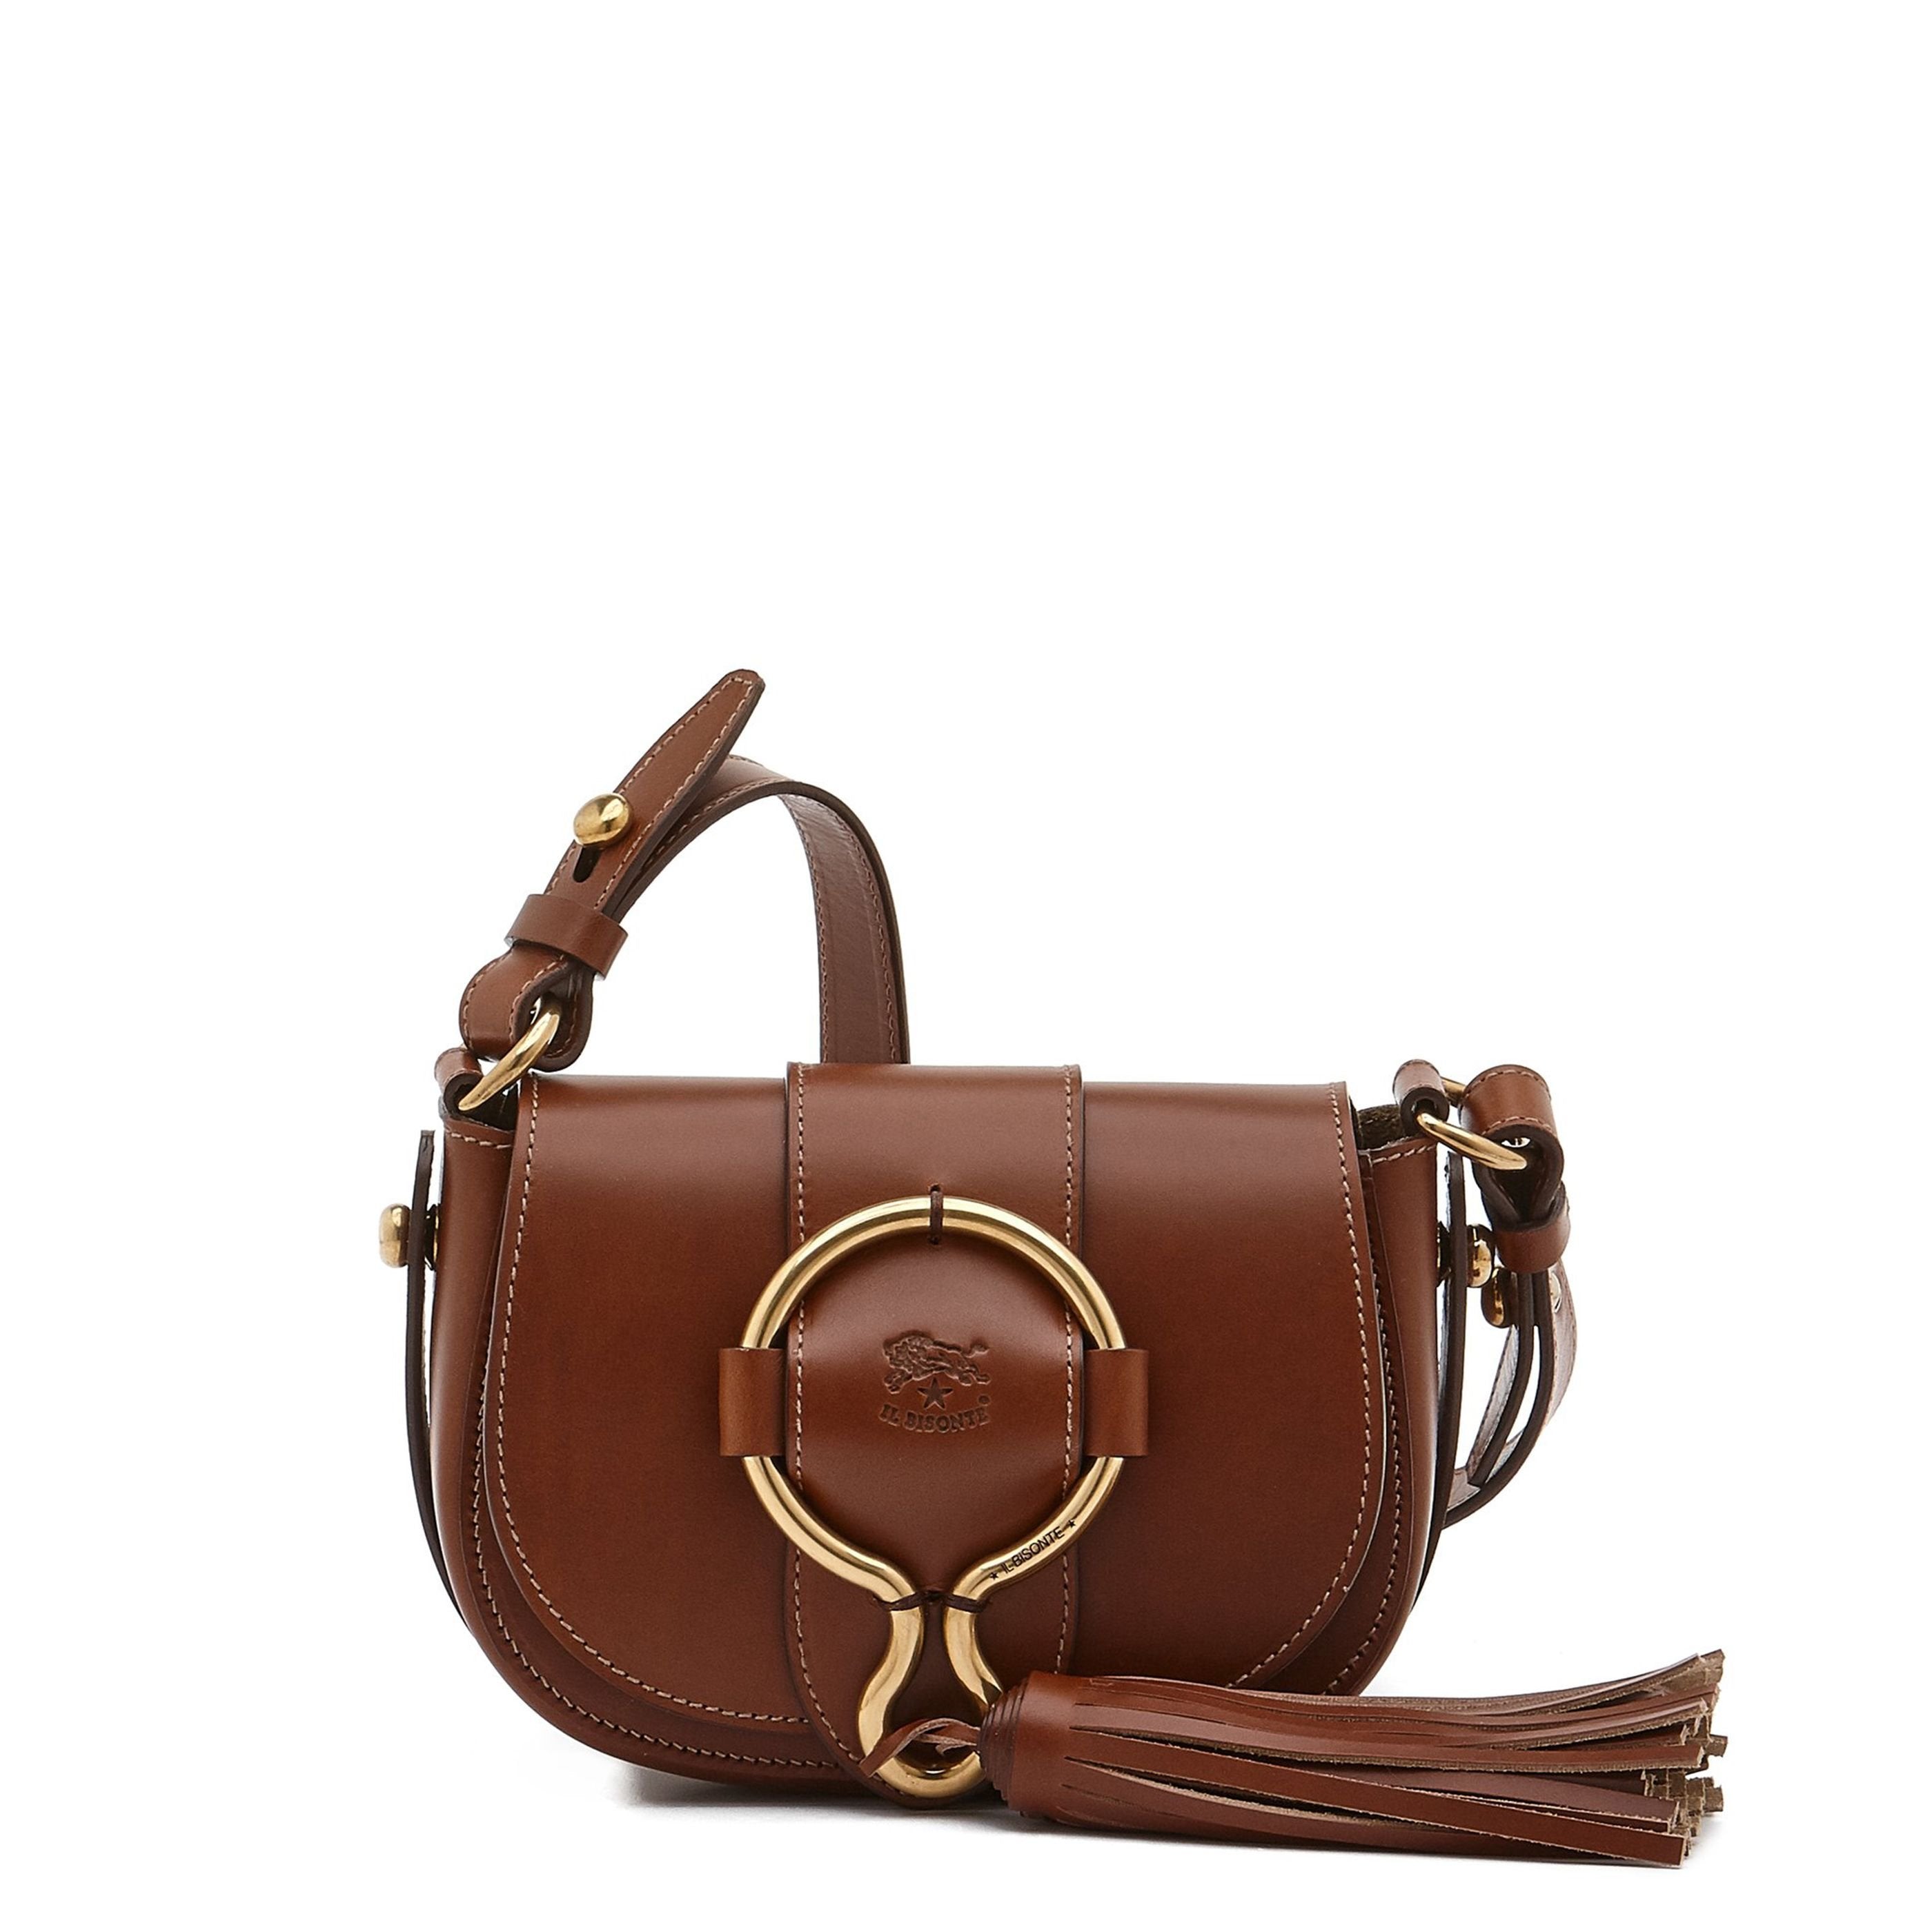 Loop  Women's crossbody bag in leather color natural – Il Bisonte